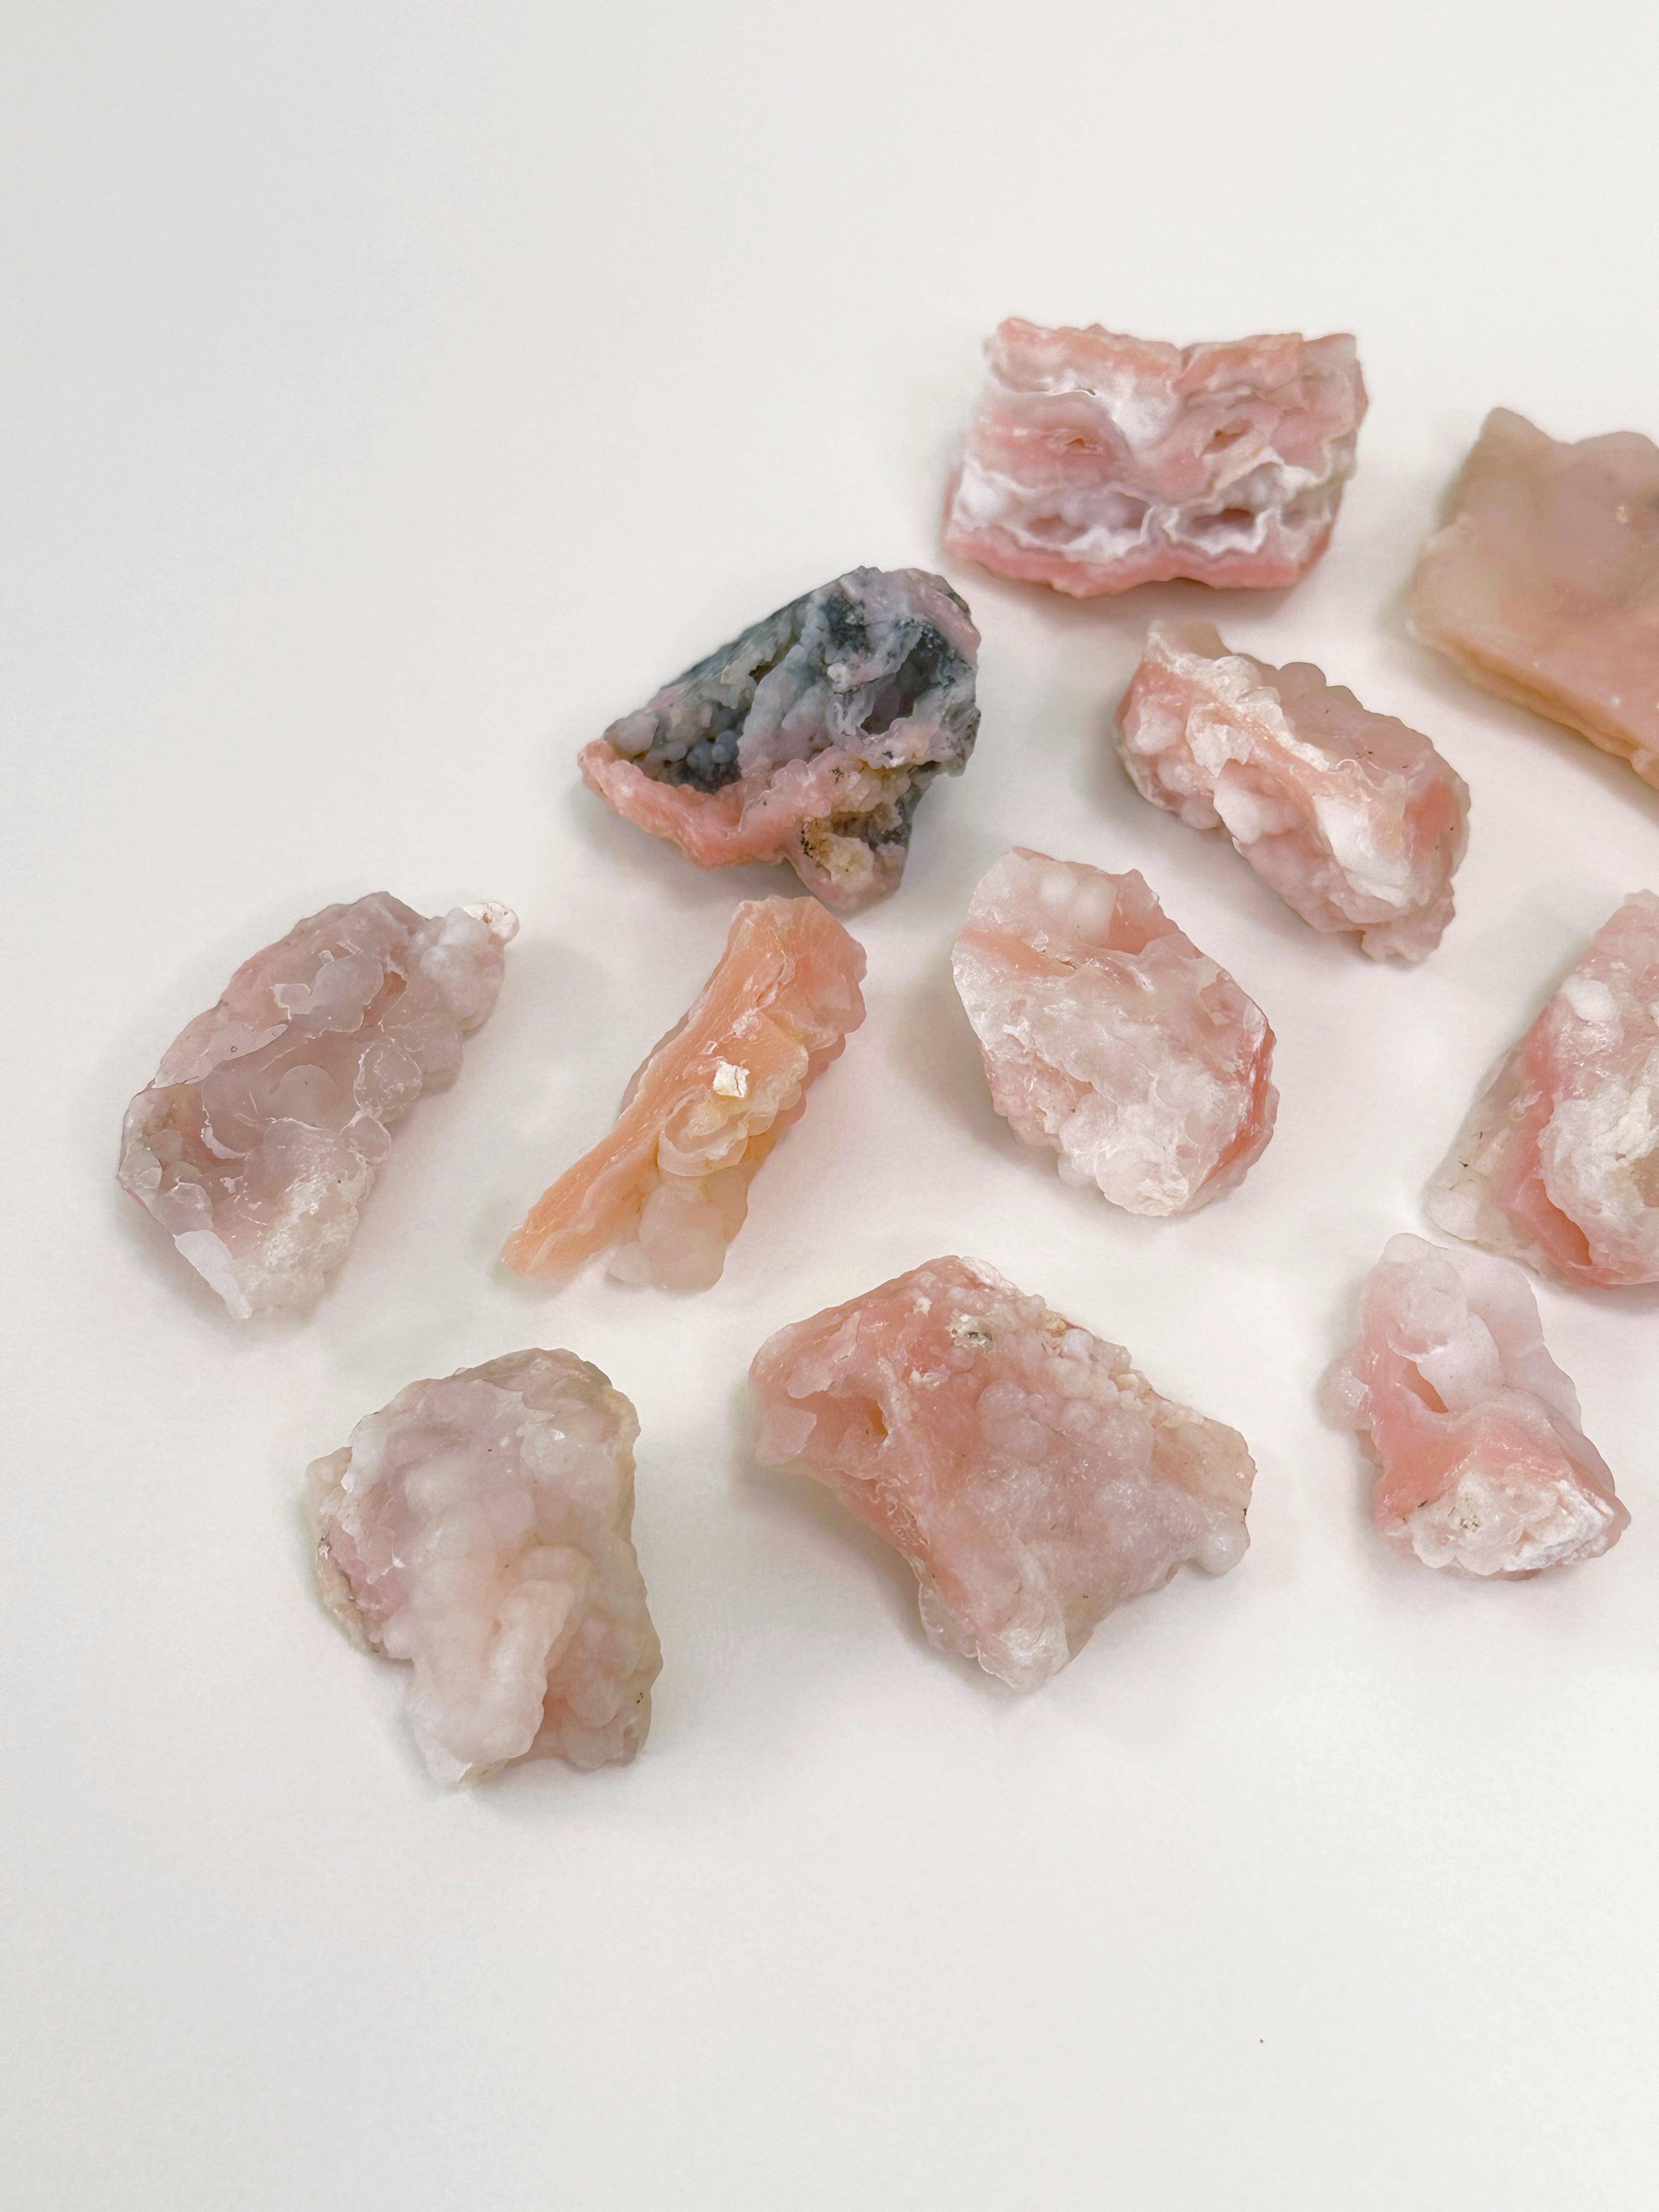 BOTRYOIDAL PINK OPAL - RAW - 33 bday, 444 sale, end of year sale, february, holiday sale, opal, pink opal, pocket crystal, raw crystal, raw stone, recently added, rough crystal, Rough Stone, valentine's day - The Mineral Maven